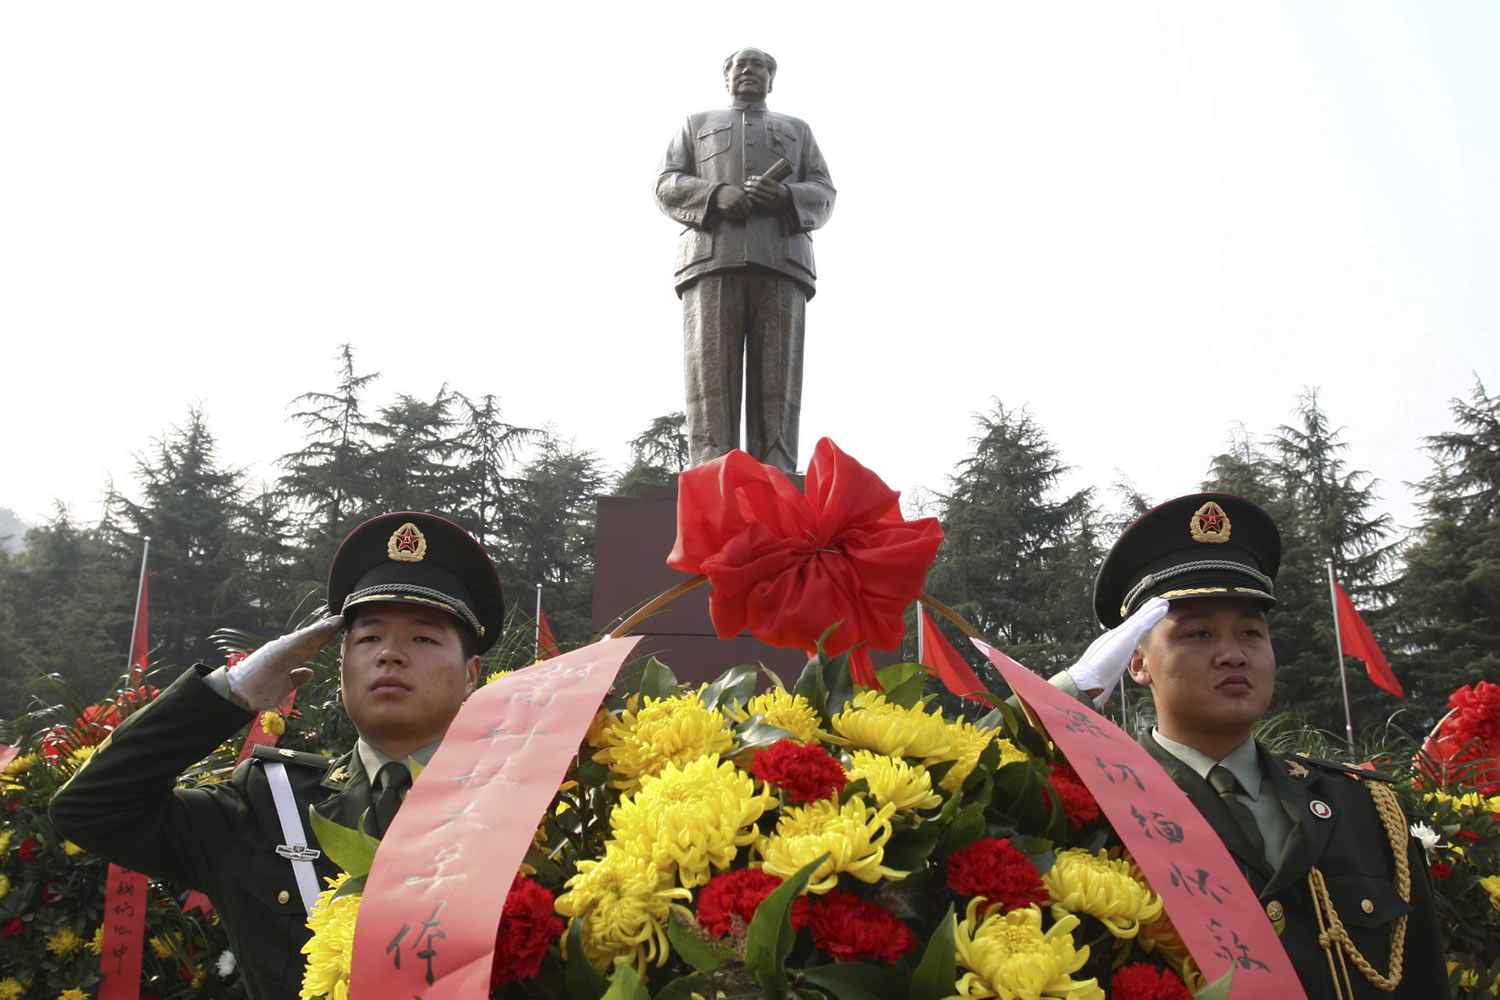 Associated Press
Security guards salute Wednesday near wreaths in front of a statue of the late Communist leader Mao Zedong in Shaoshan, Mao's hometown, in southern China's Hunan province.